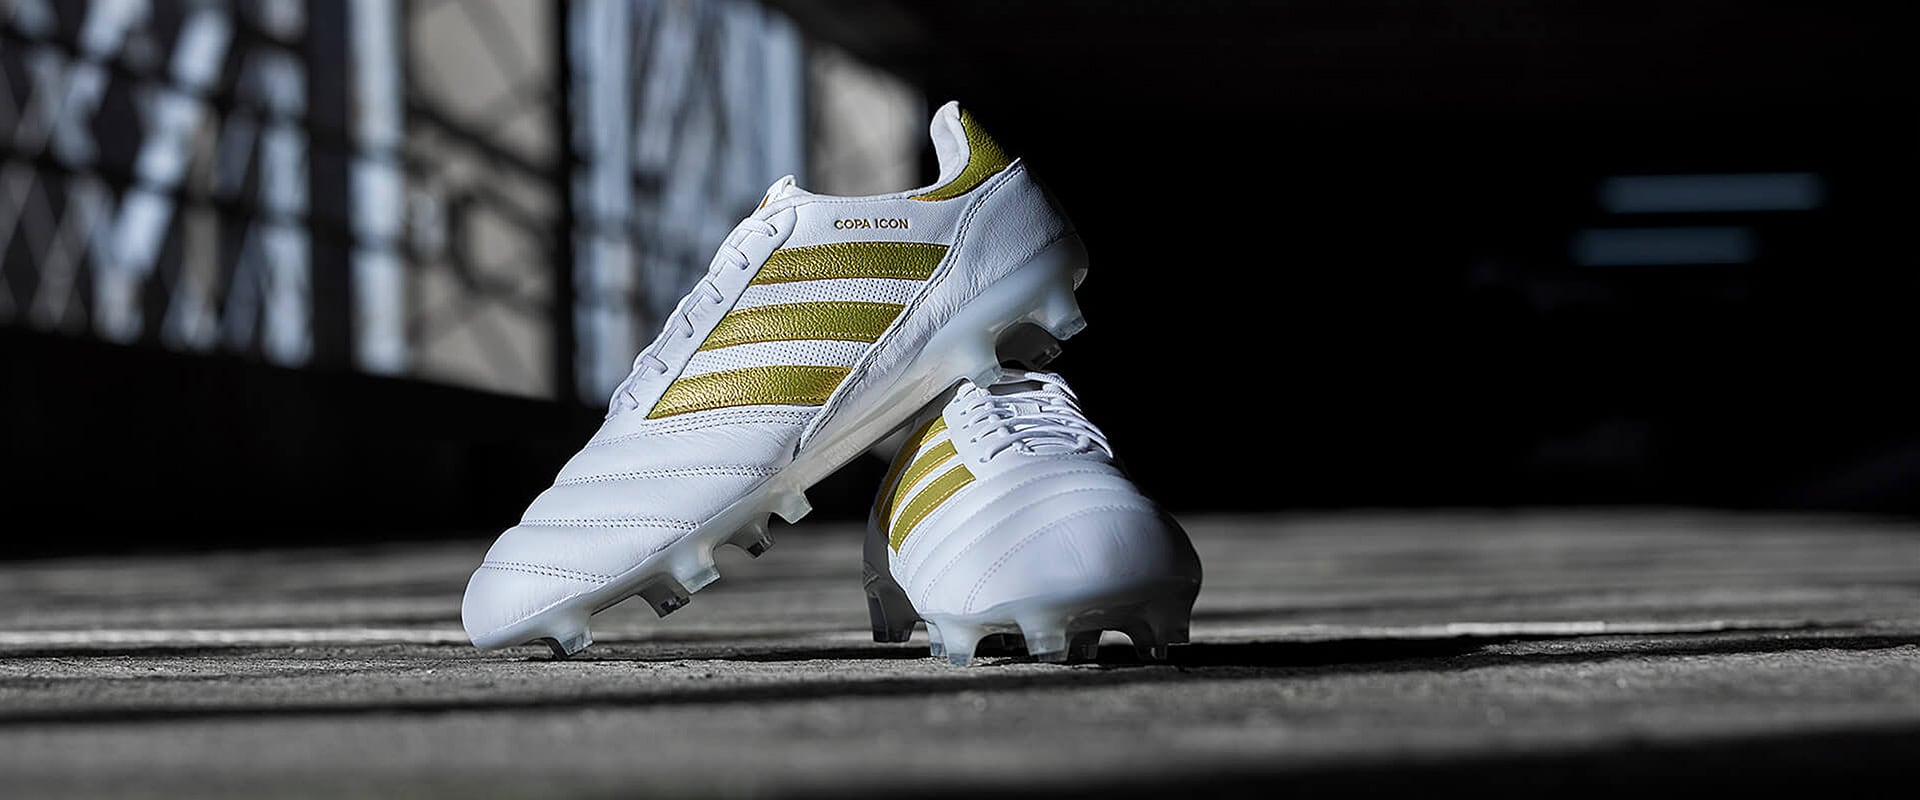 adidas Copa Icon Special Edition FG - Ftwr White/Gold Met/Ftwr White ...